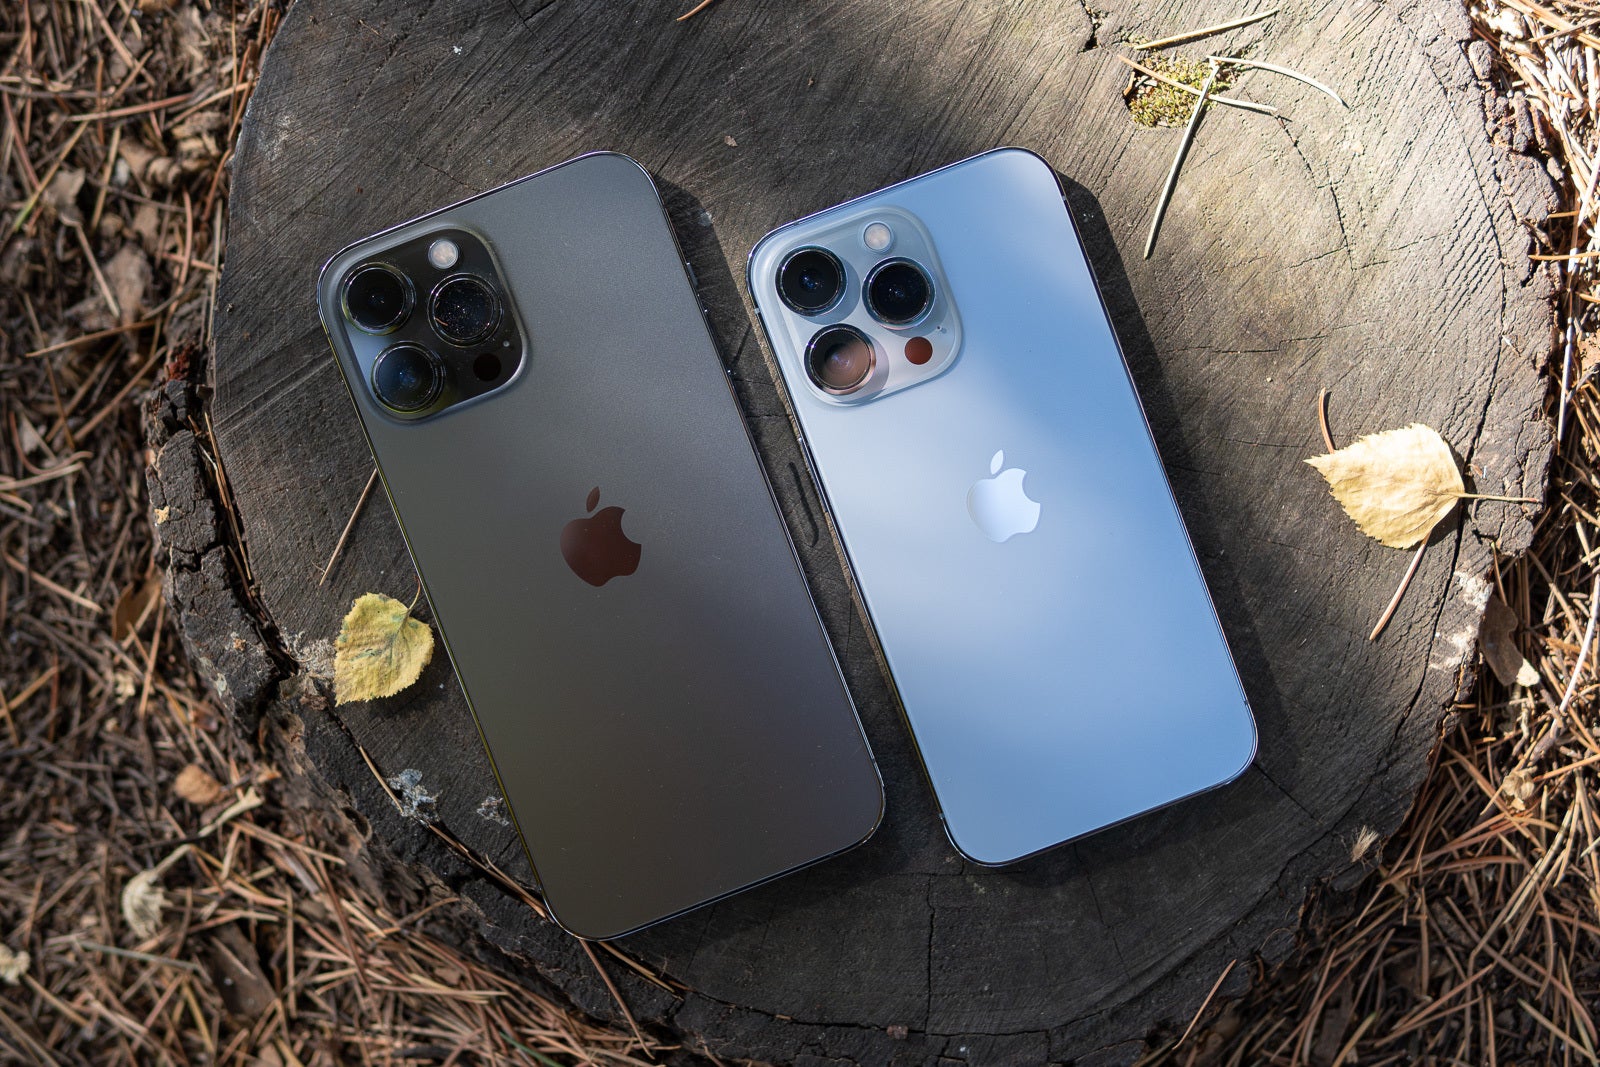 The iPhone 14 might be stuck with Wi-Fi 6 just like the iPhone 13 - Apple's iPhone 14 and rumored AR headset could both feature Wi-Fi 6e if the company secures enough components